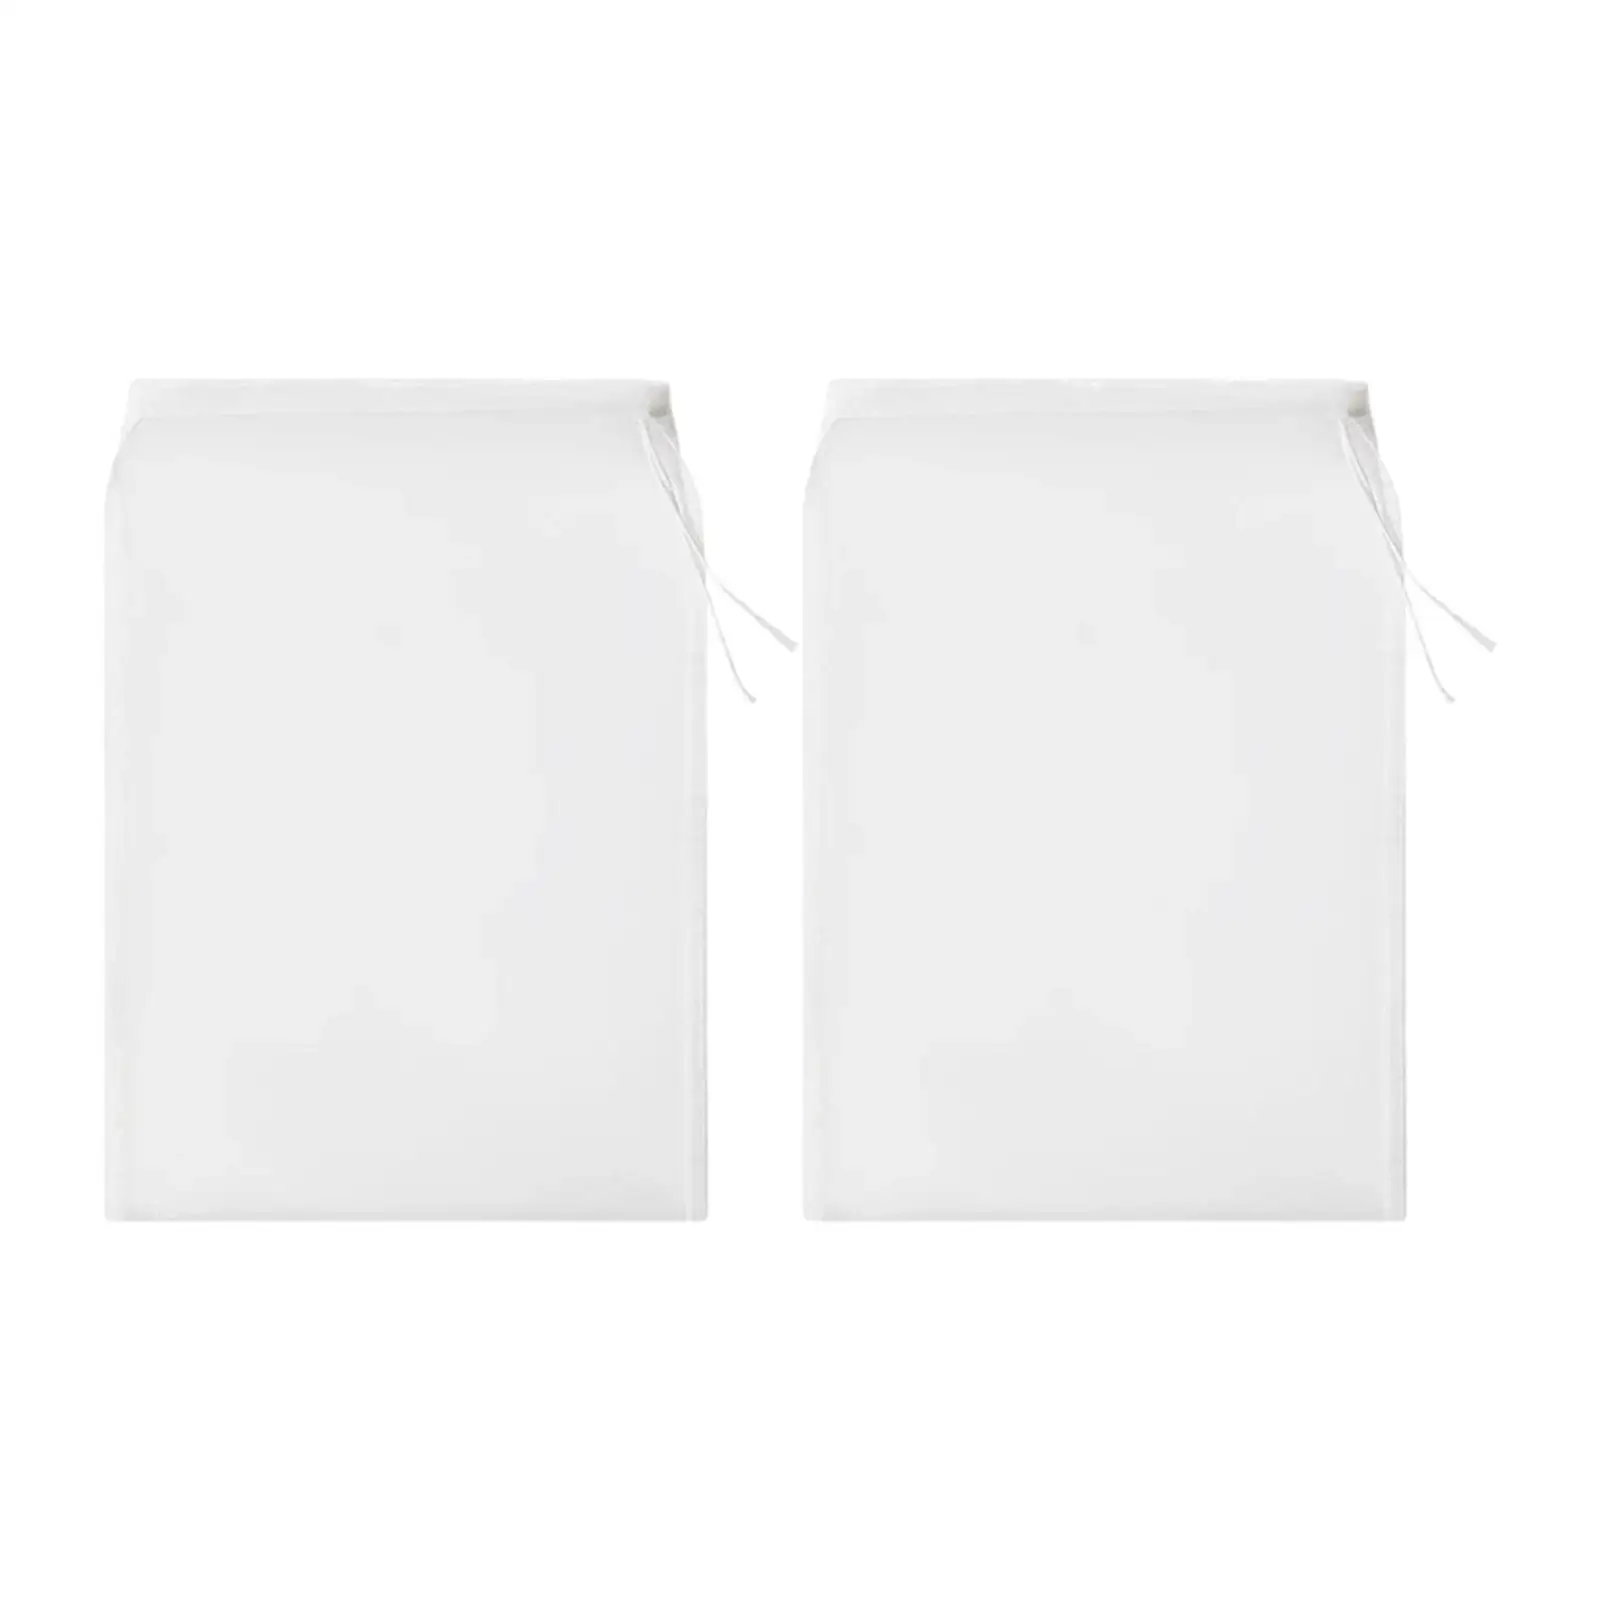 Nut Milk Bag with Drawstring Cheesecloth Filter Bag Unbeached Reusable for Soy Brew Coffee Soup Nut Milk 11.81`` x 7.87``